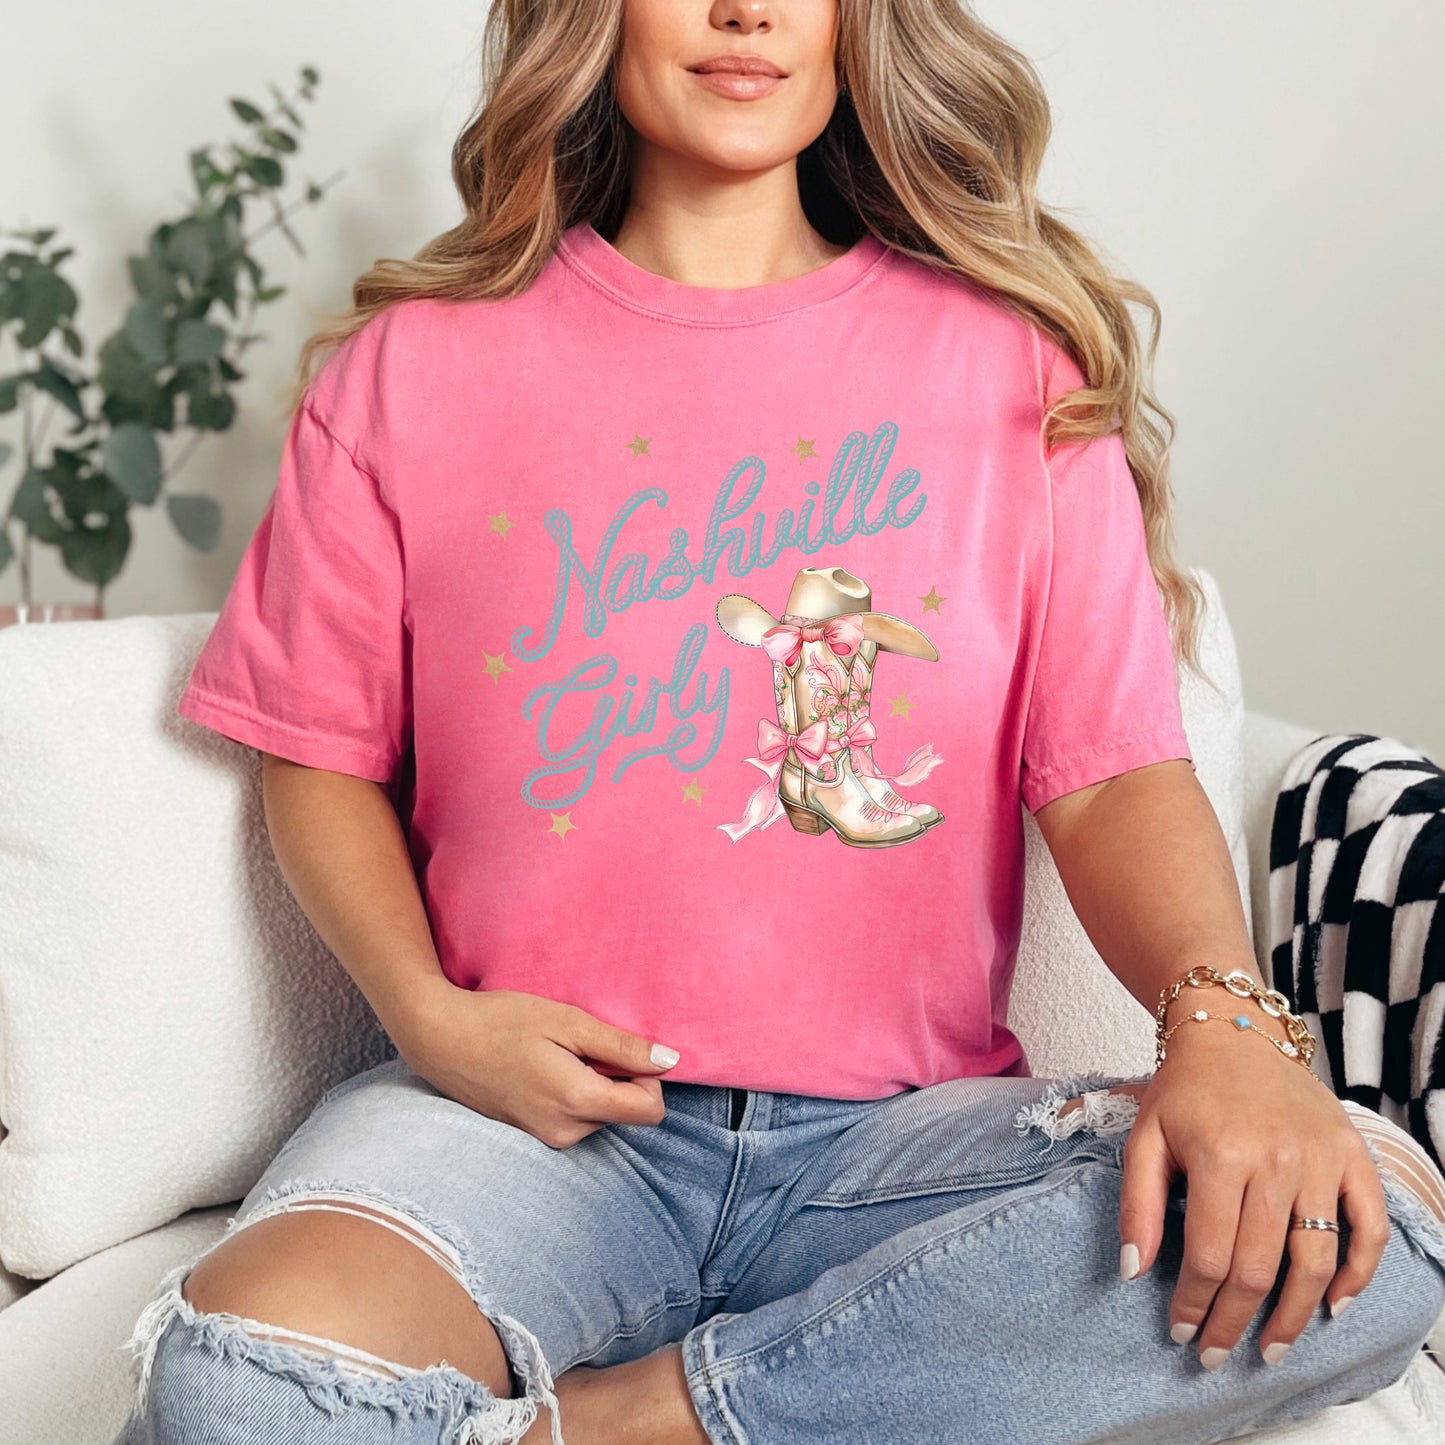 Coquette Nashville Girly | Garment Dyed Short Sleeve Tee